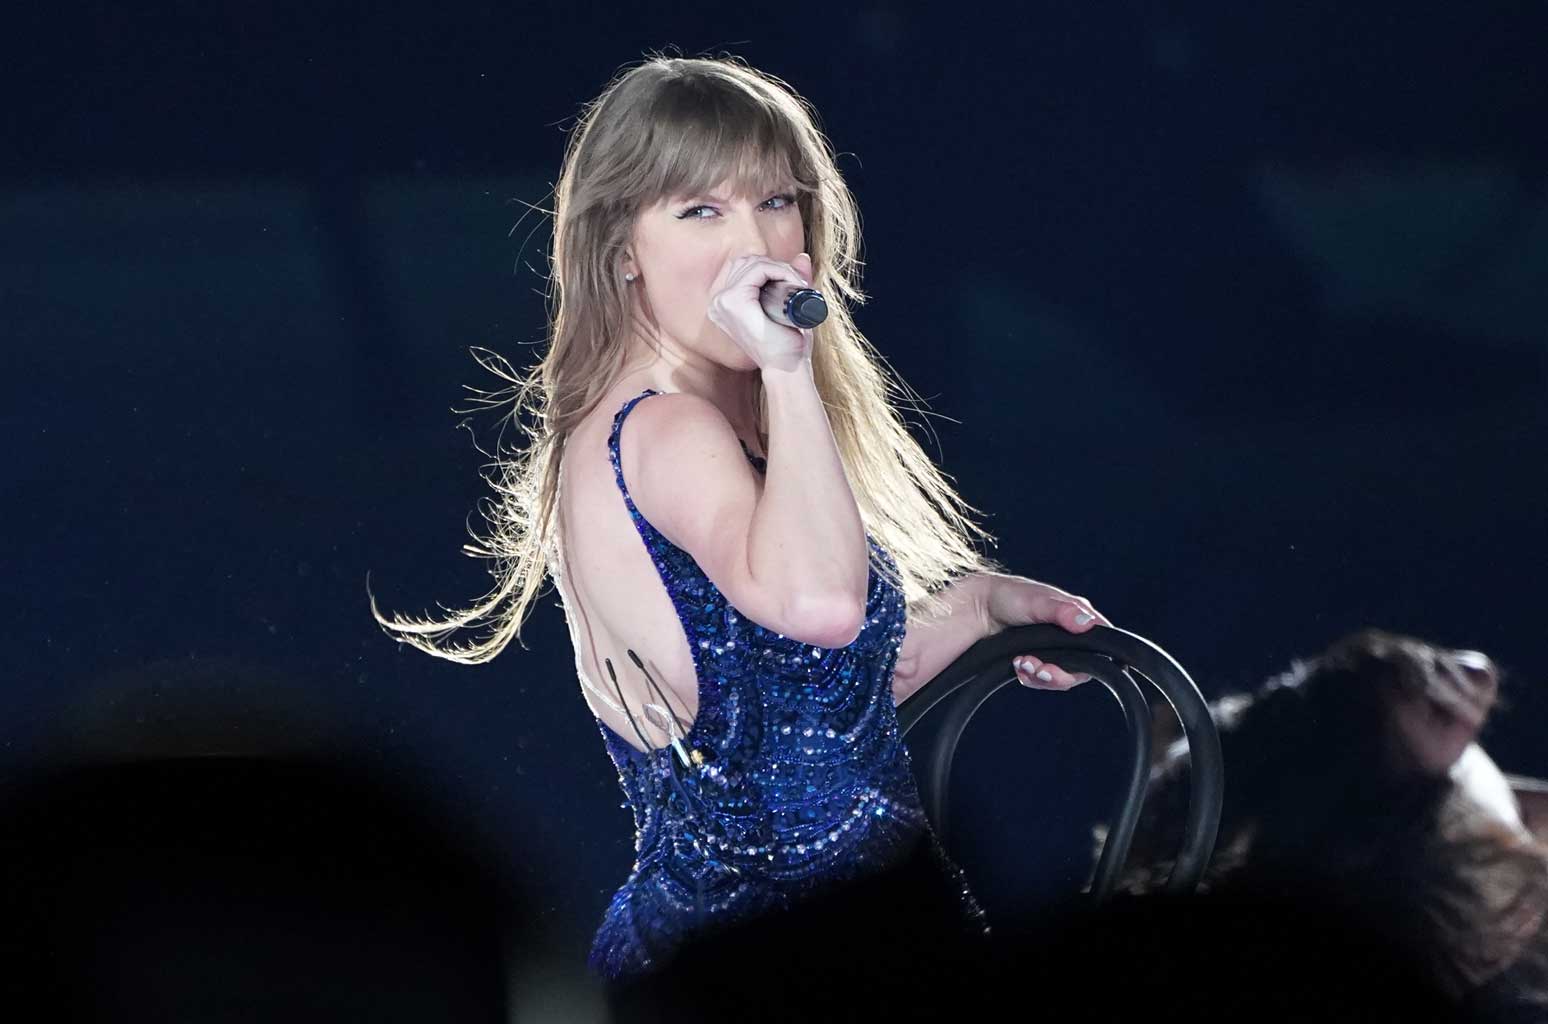 taylor swift jokes about tripping & nearly falling at tokyo eras show: ‘my life flashed before my eyes'